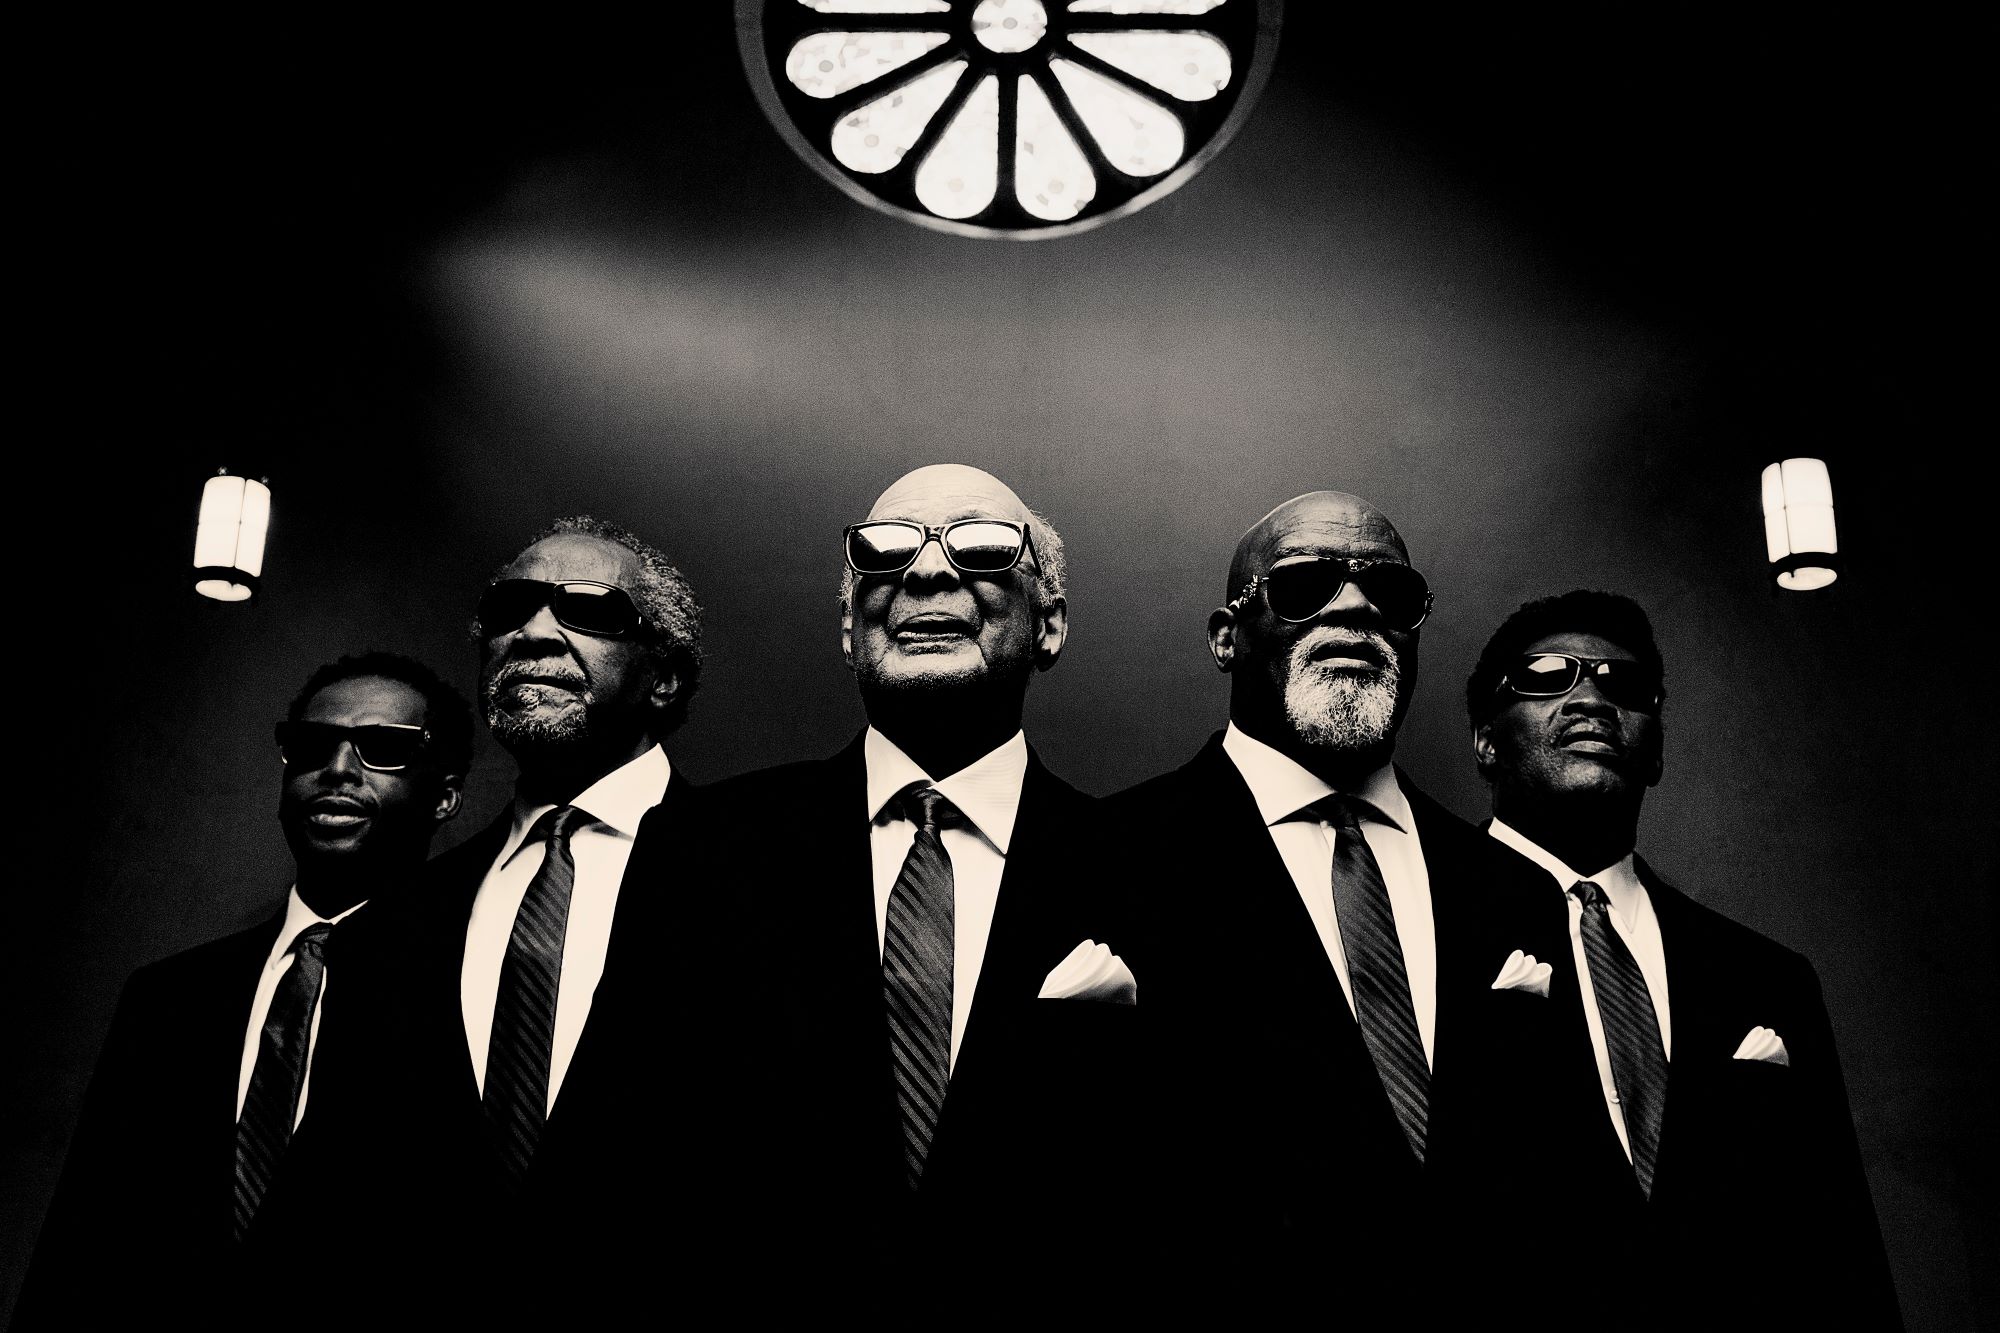 Blind boys of Alabama band members black and white